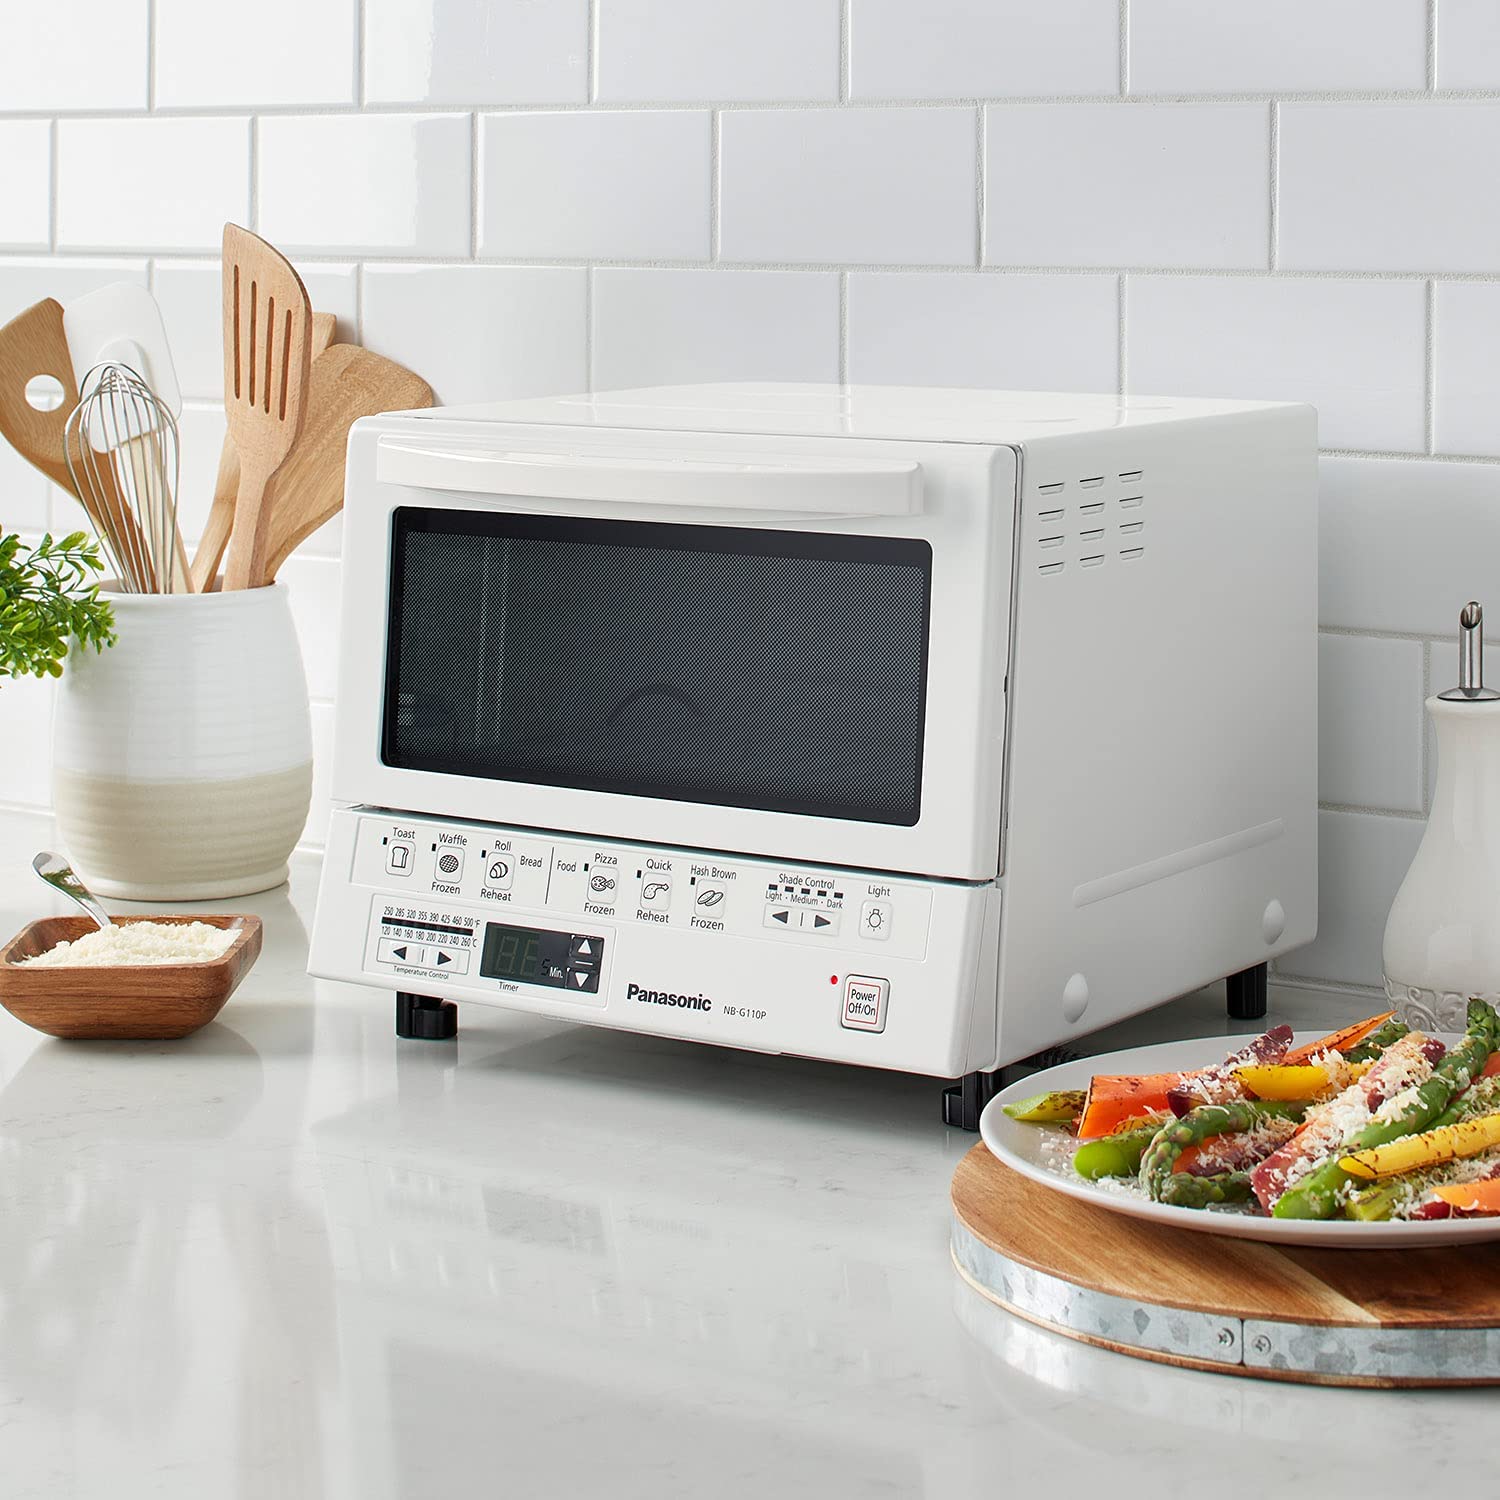 Panasonic FlashXpress Toaster Oven in White (NB-G110PW)